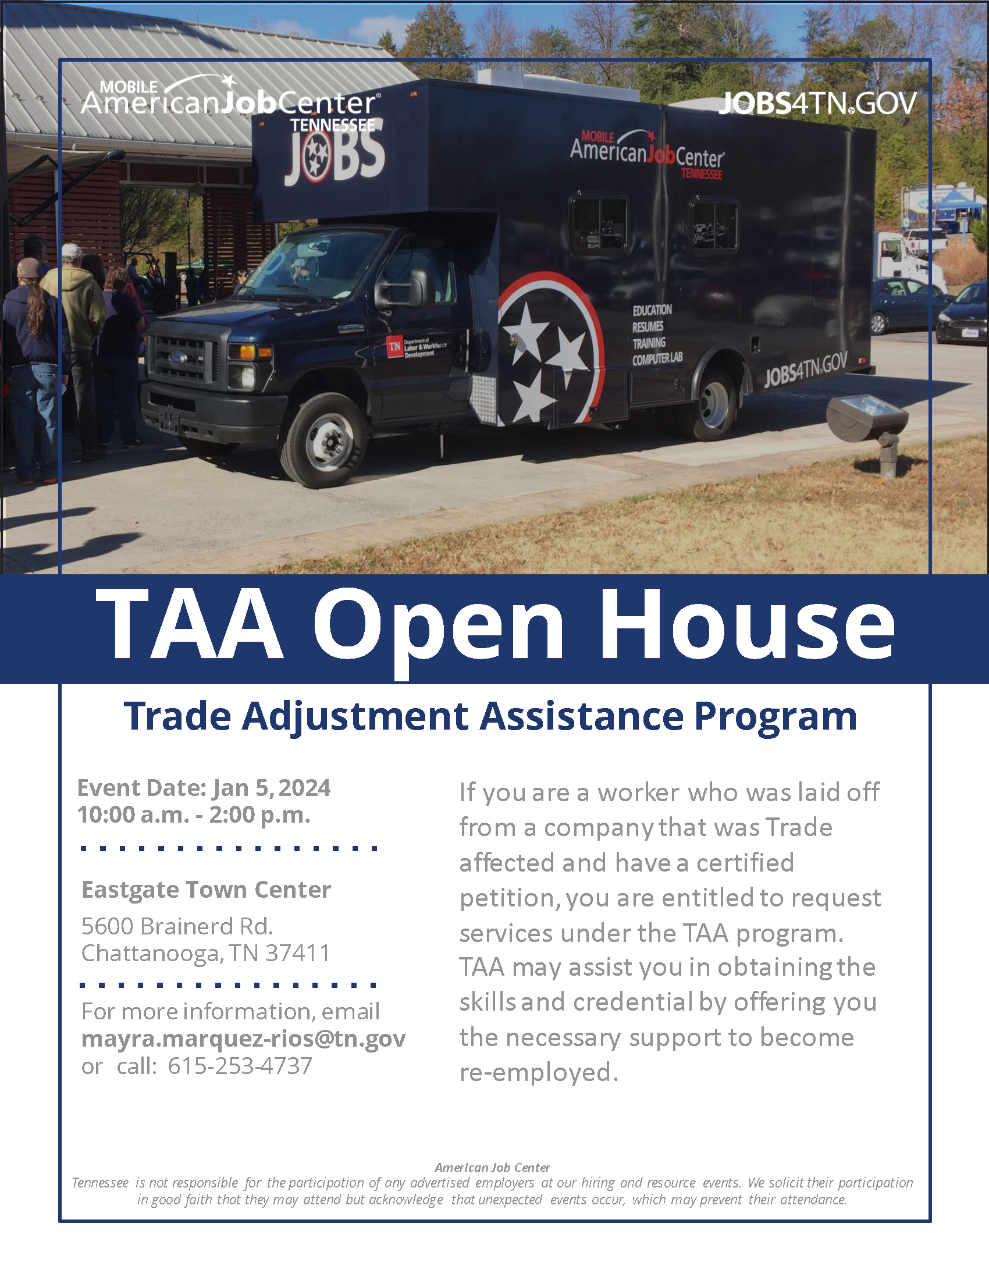 TAA Open House - Chattanooga, TN, 1/5/2024 10 am to 2 pm EST